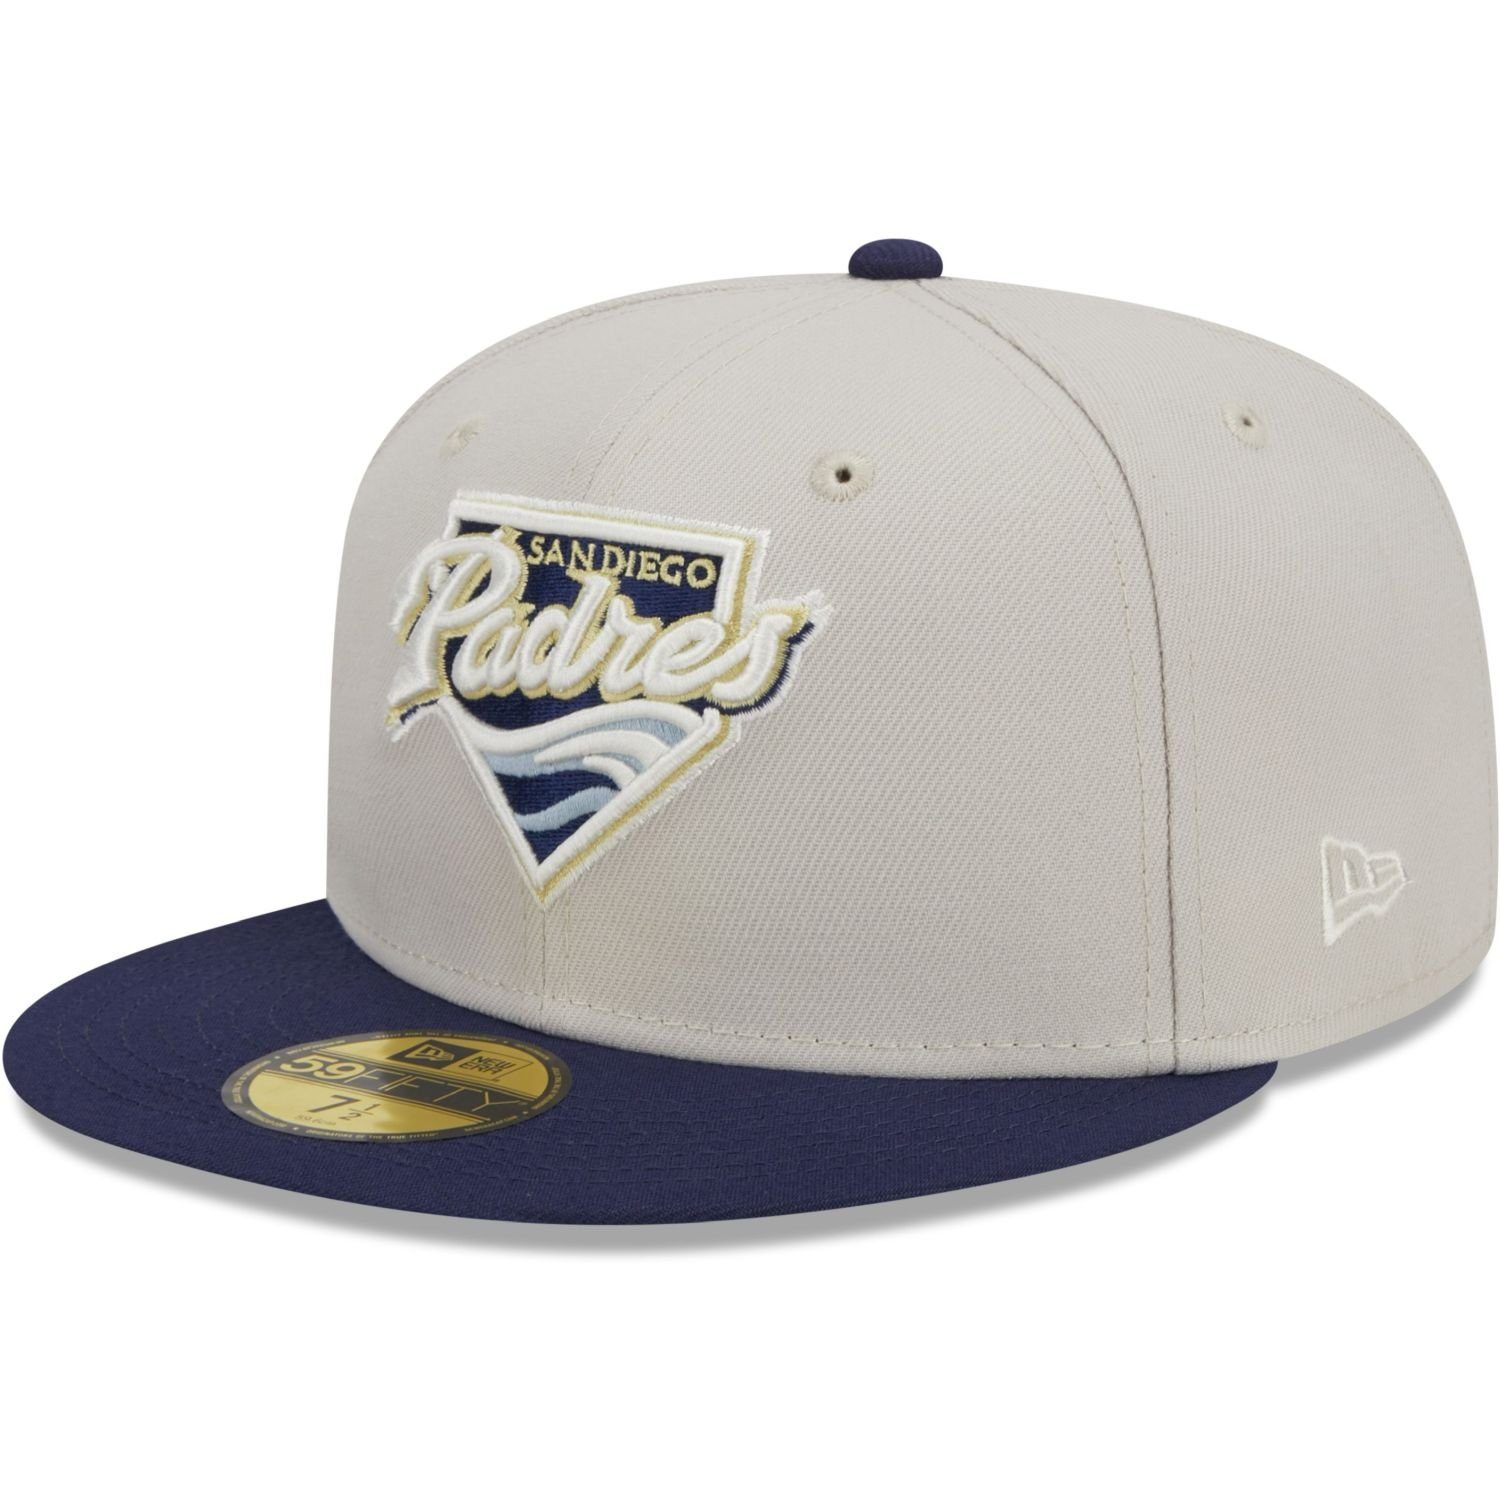 FARM Era Diego San Cap Fitted 59Fifty New TEAM Padres